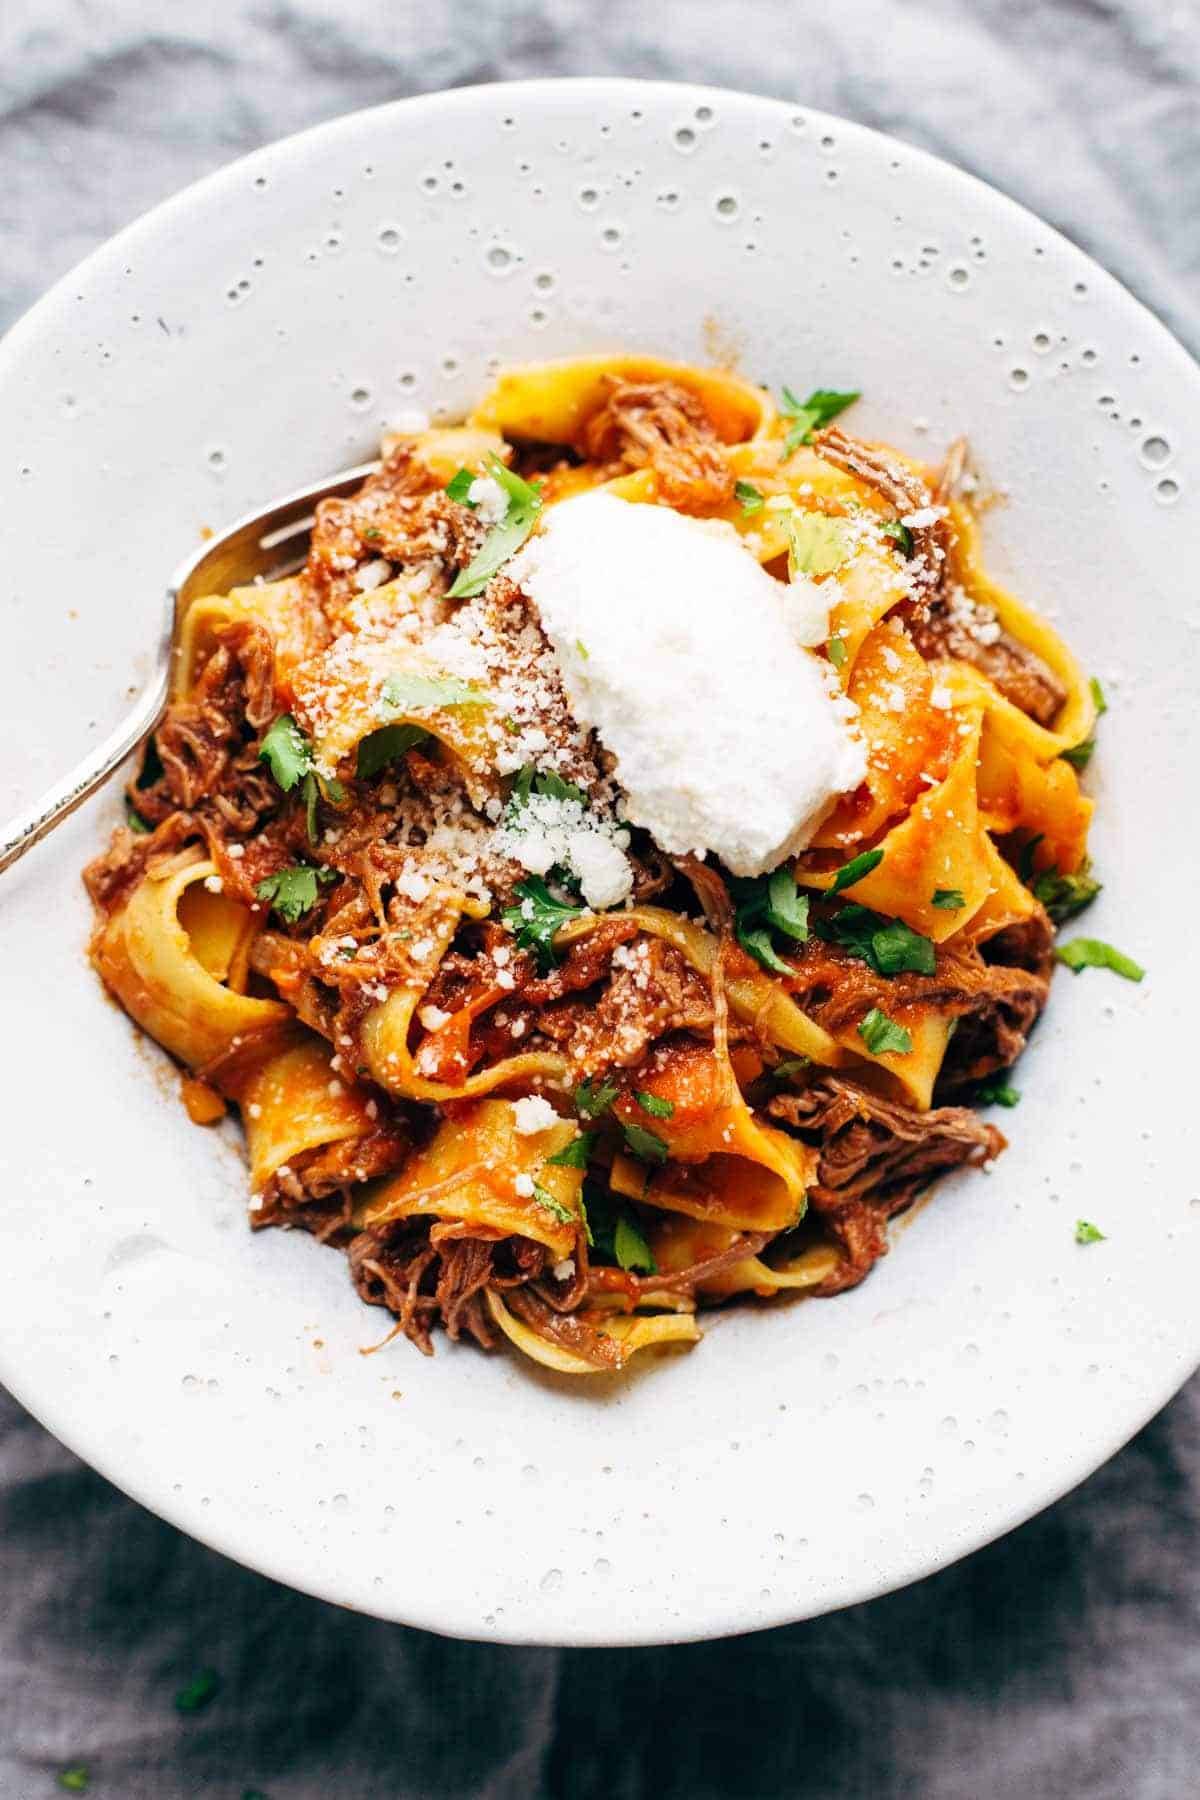 Slow Cooker Beef Ragu with Pappardelle - easy comfort food from the new Skinnytaste cookbook! | pinchofyum.com